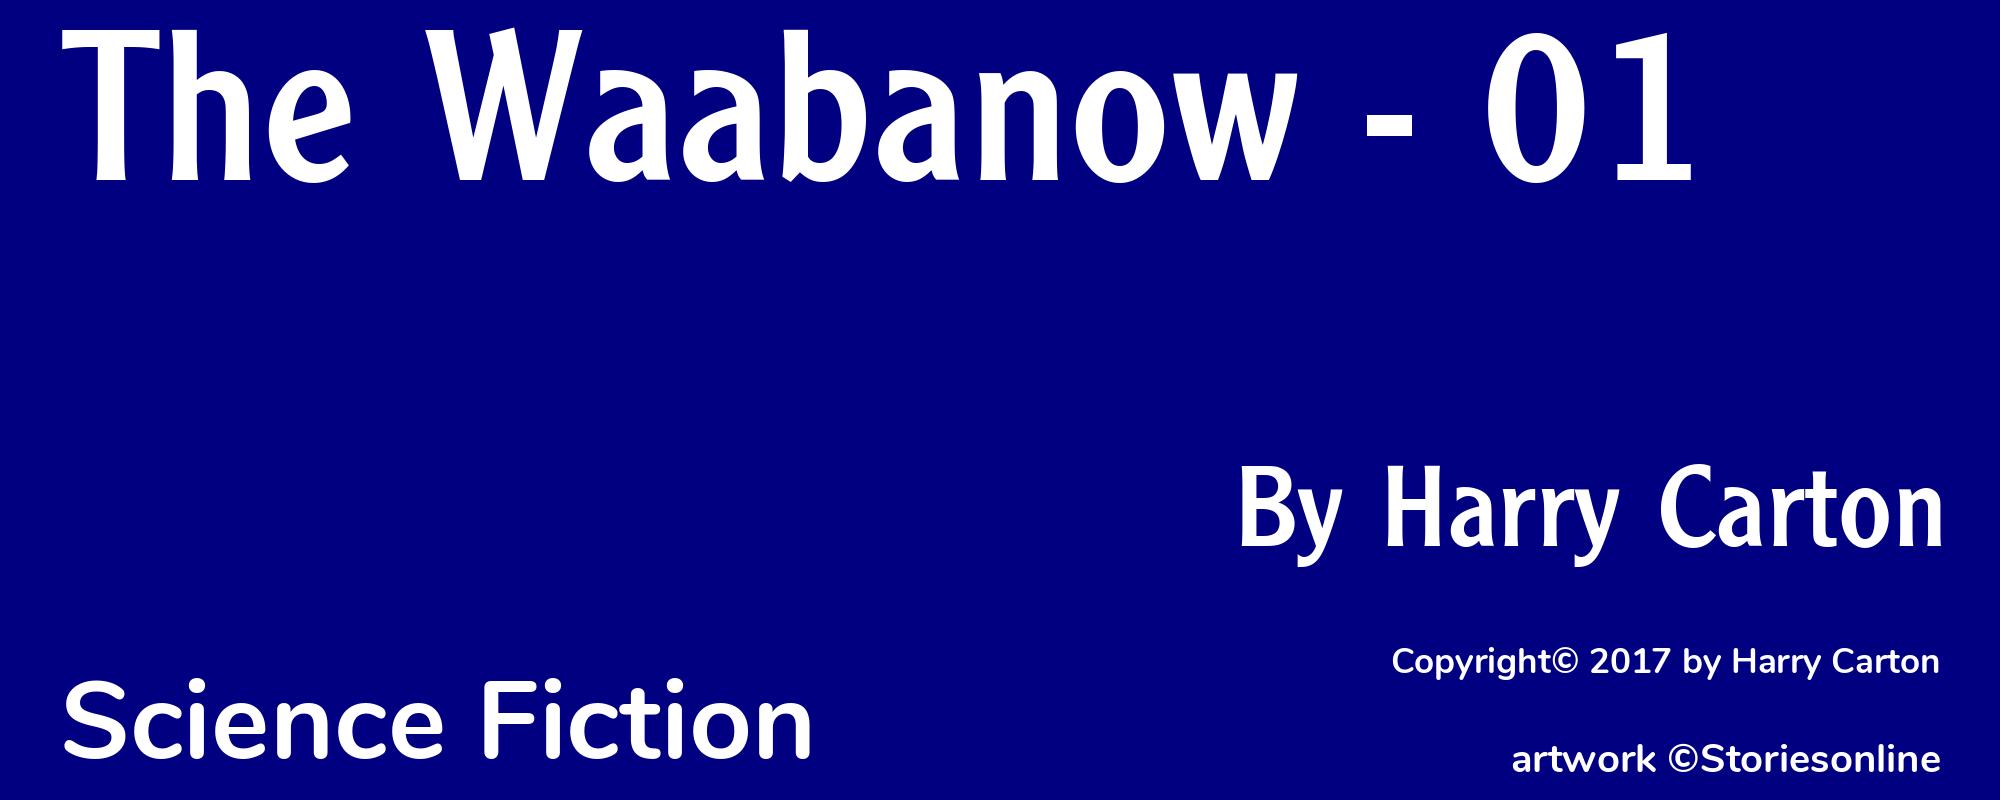 The Waabanow - 01 - Cover